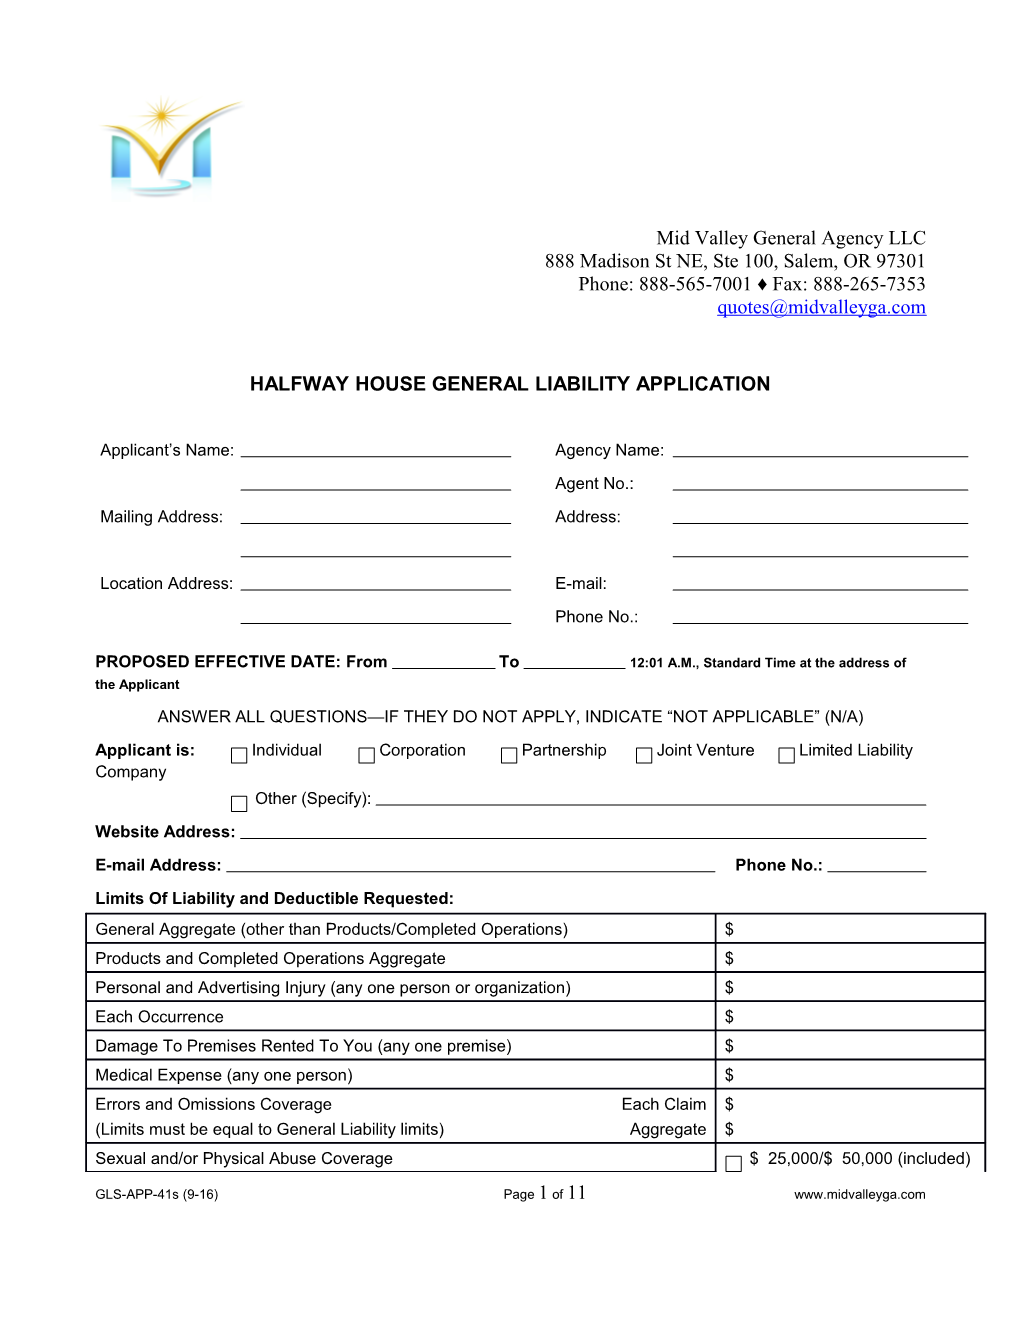 Halfway House General Liability Application